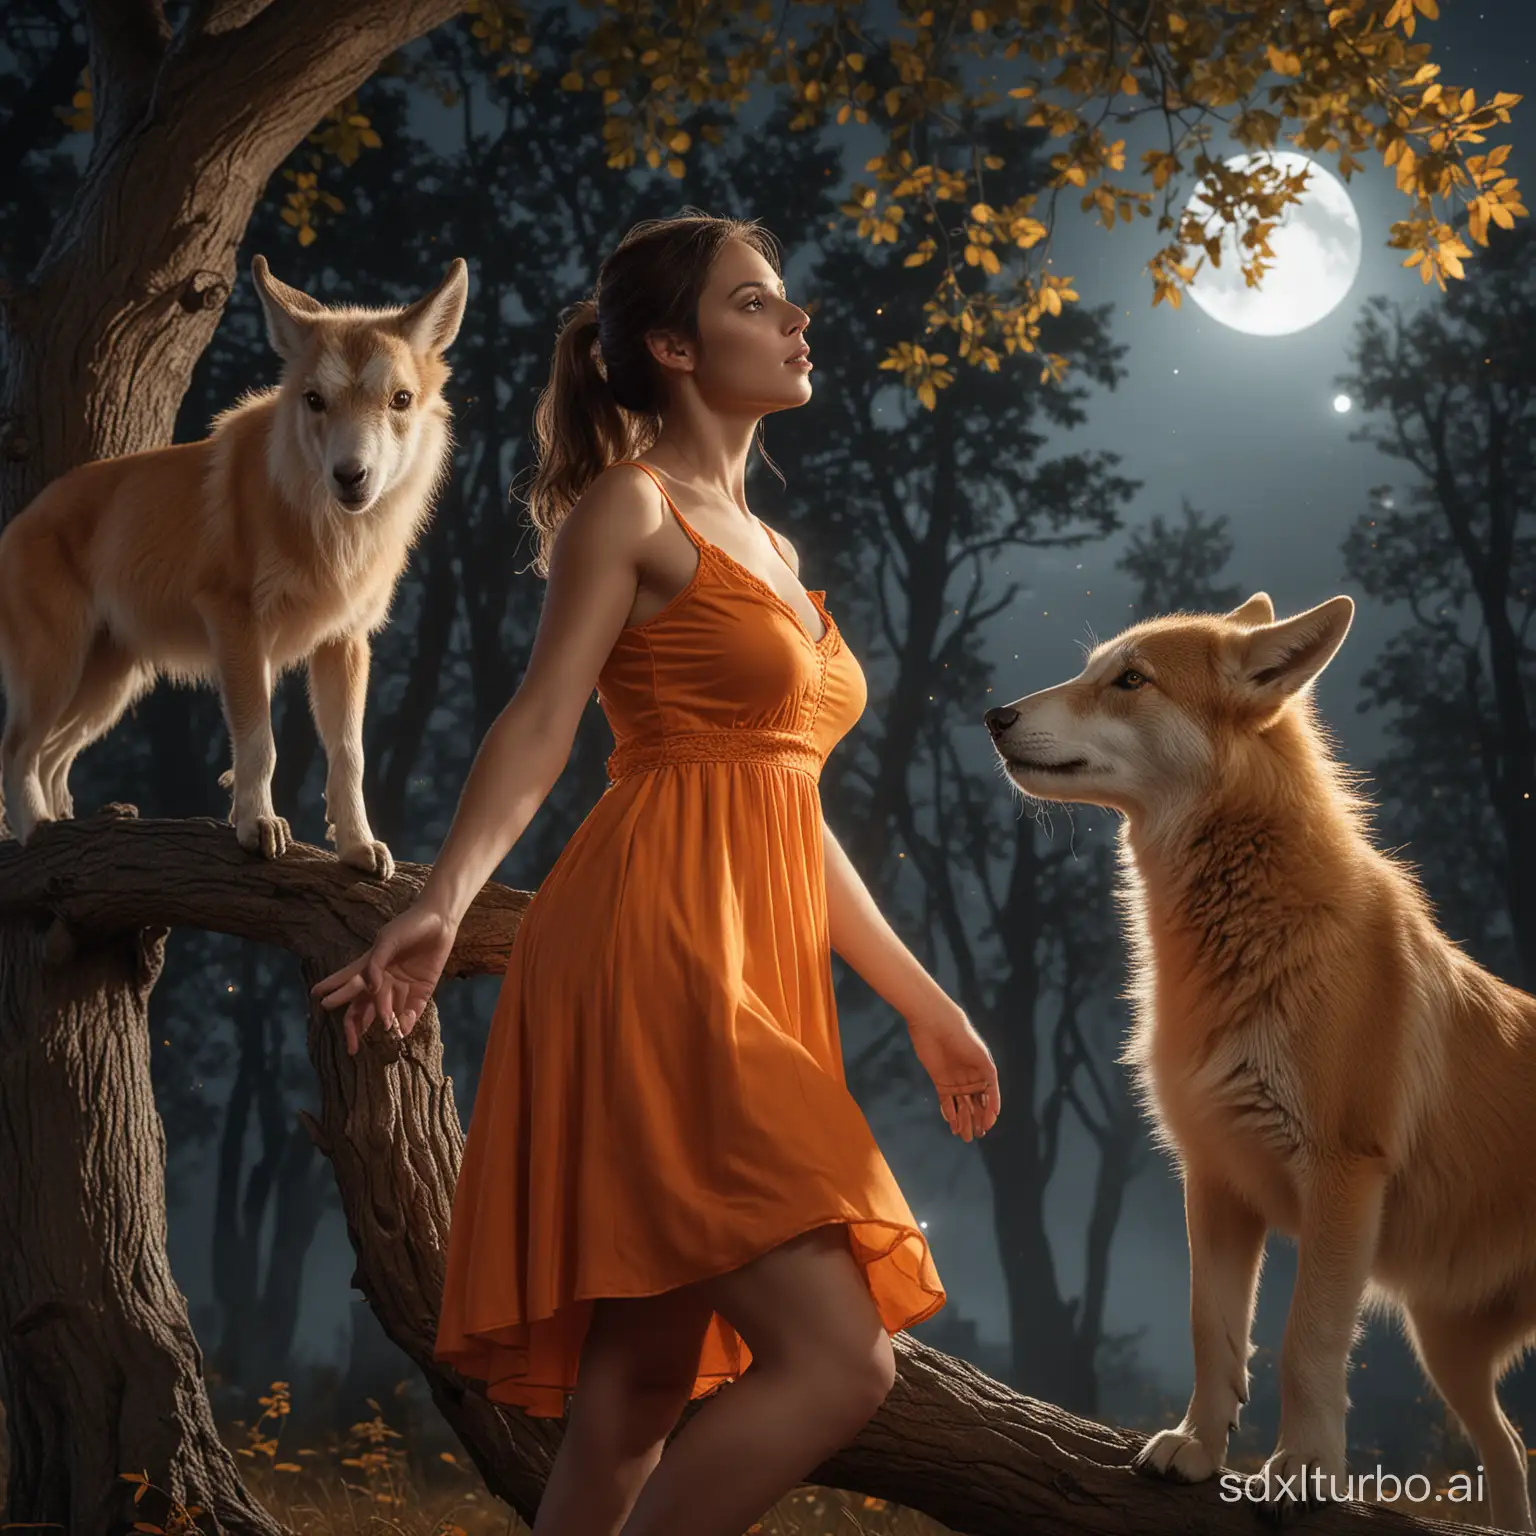 Goat,(masterpiece), hyper realistic young woman with short orange dress, leaning on a tree with dynamic pose. The background is luminous spirit animals taking the form of wolves, otherworldly and transparent, come together under the moonlit sky, extreme depth of field, imperfections, moonglow backlight, low angle,  , <lora:add_detail:0.7>, sagging breasts